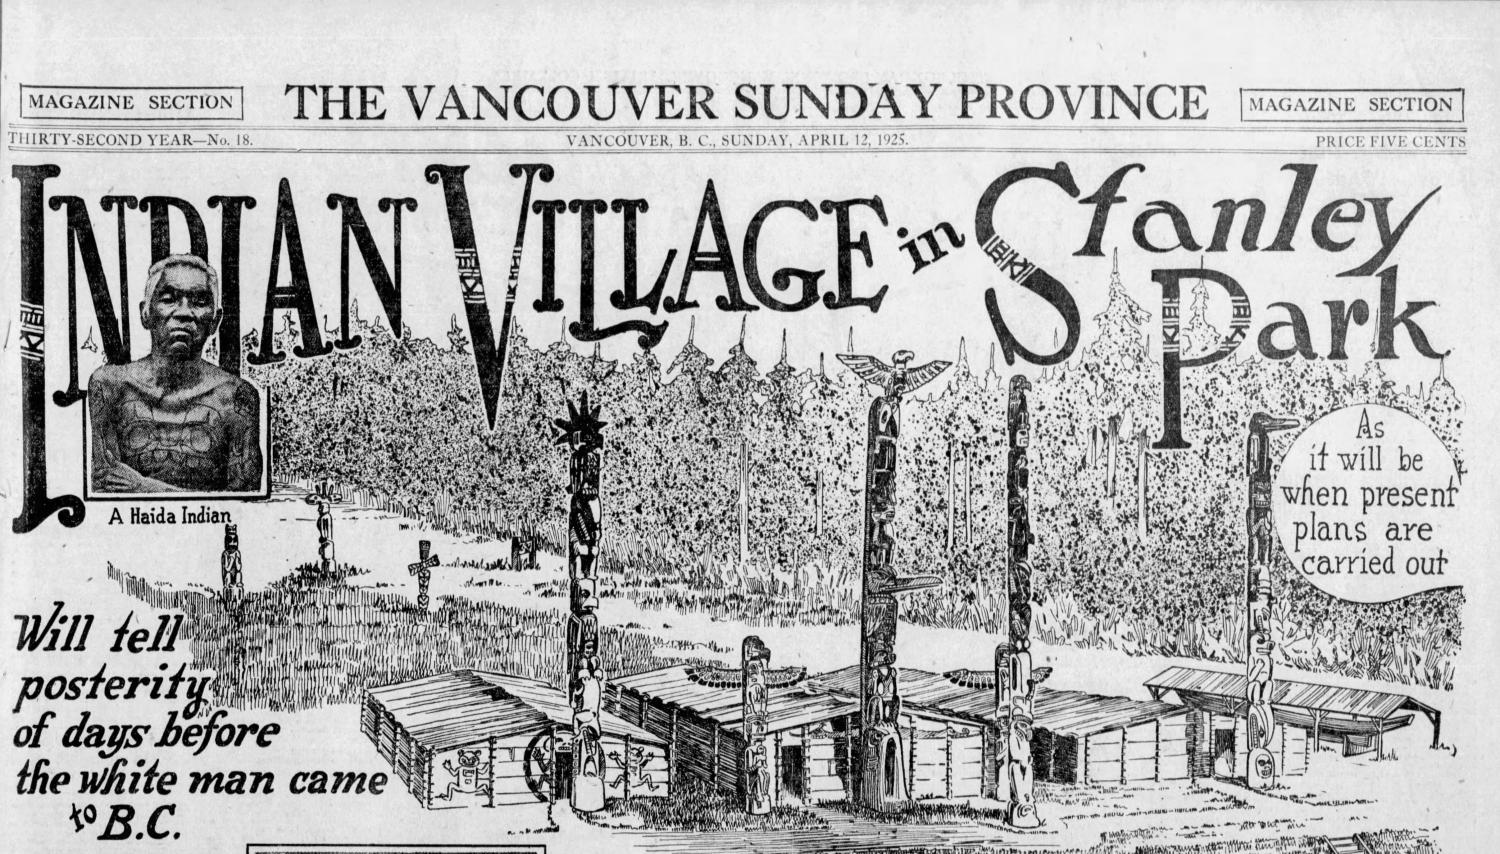 Feature story on the planned “Indian village” replica in Stanley Park in 1925.